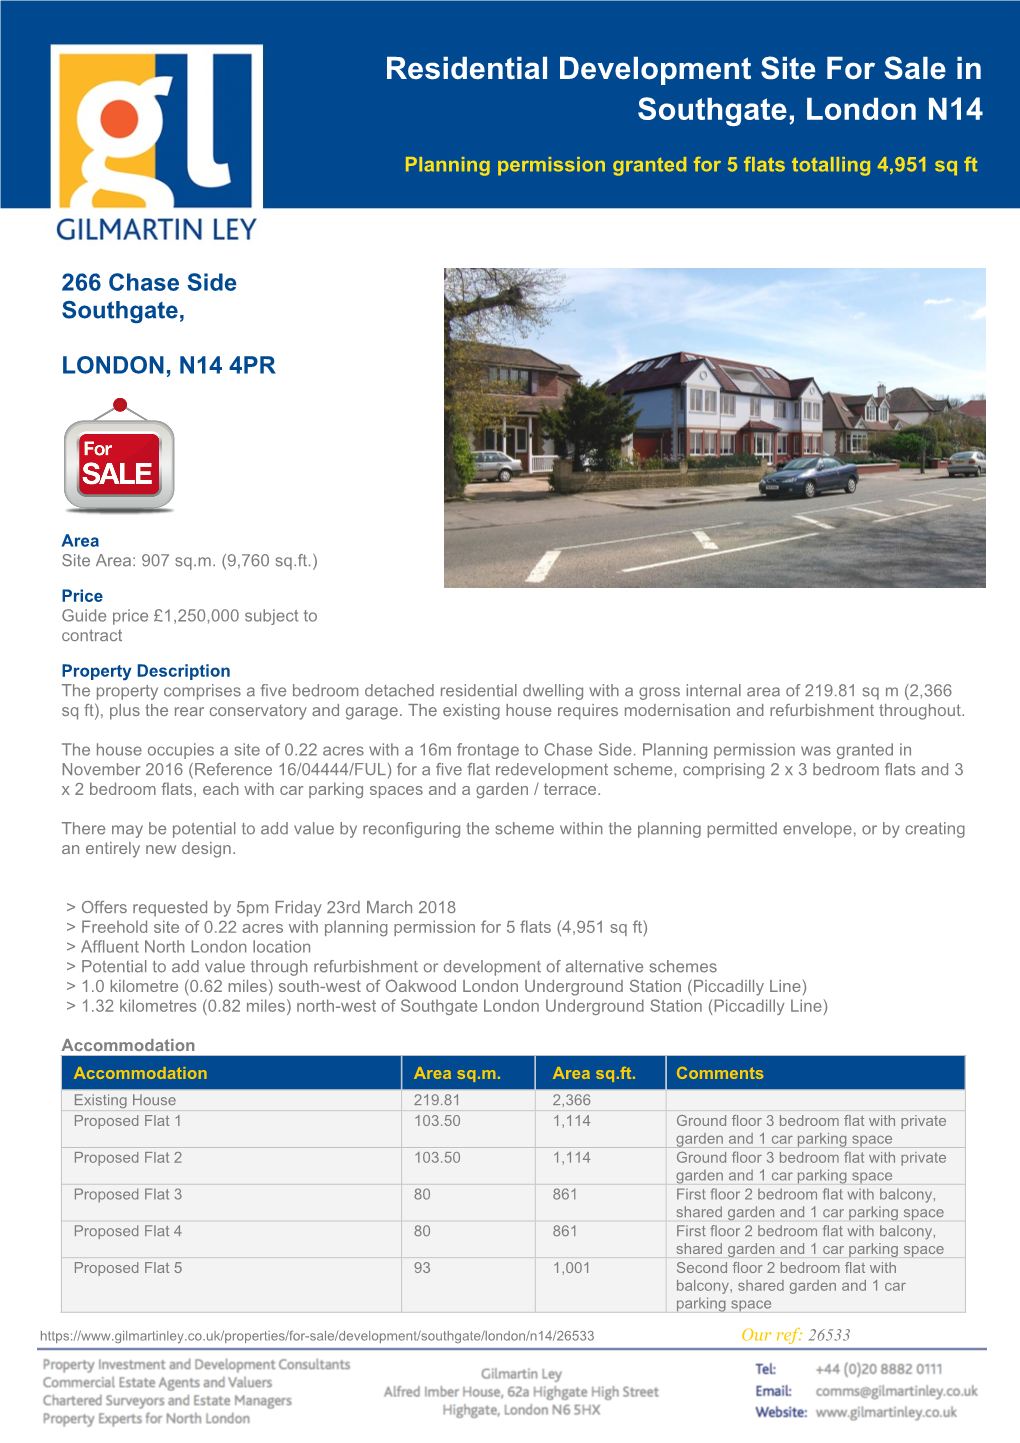 Residential Development Site for Sale in Southgate, London N14